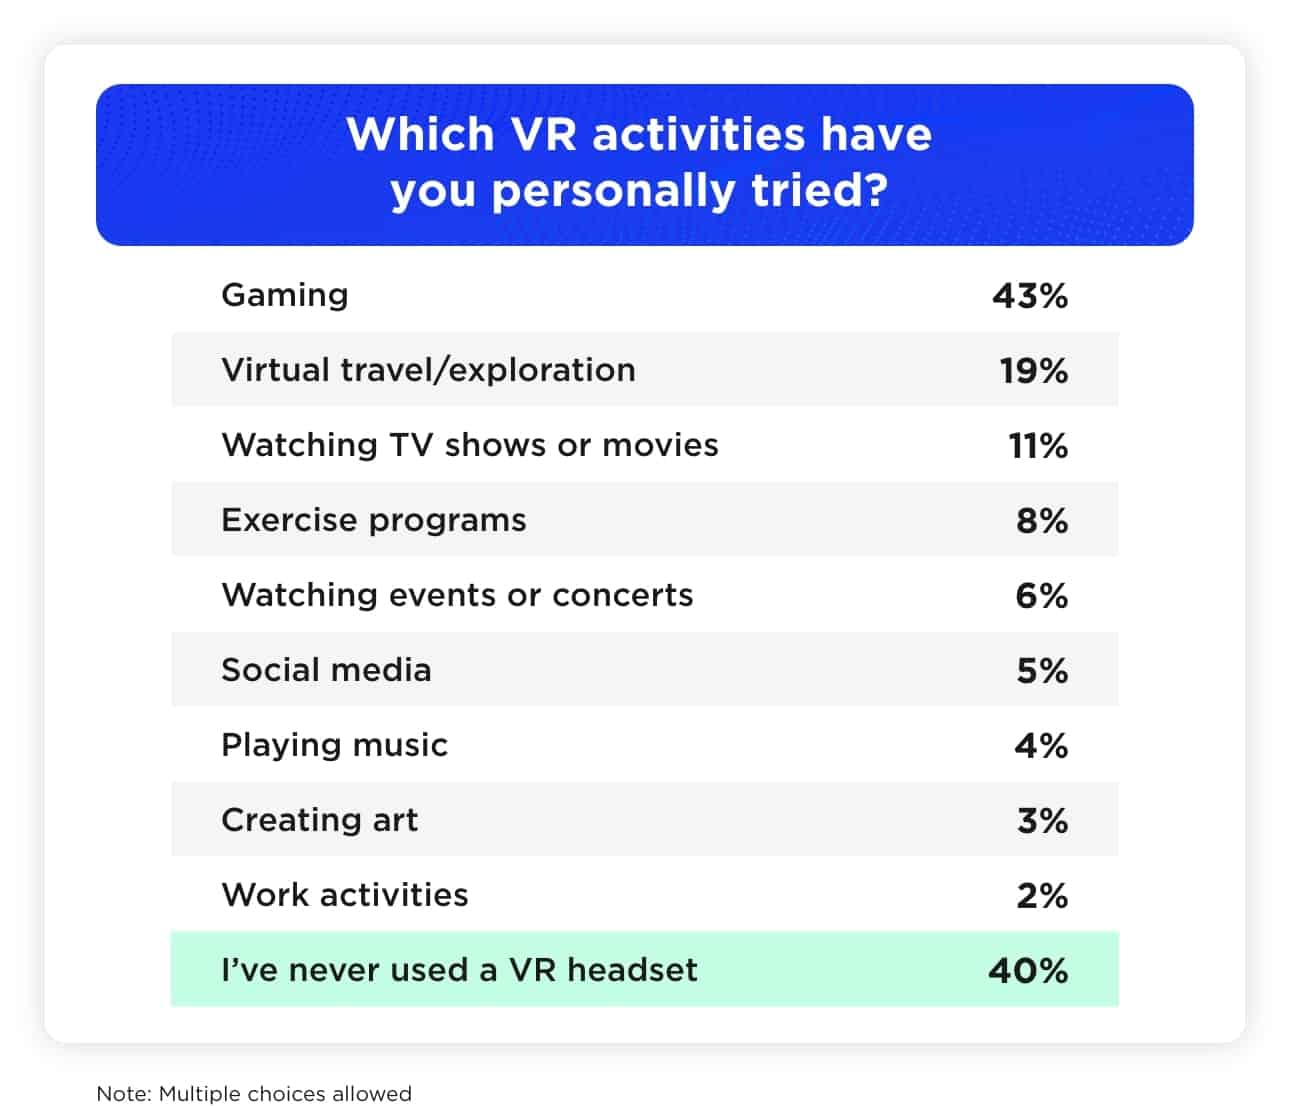 Which VR activities have you personally tried?